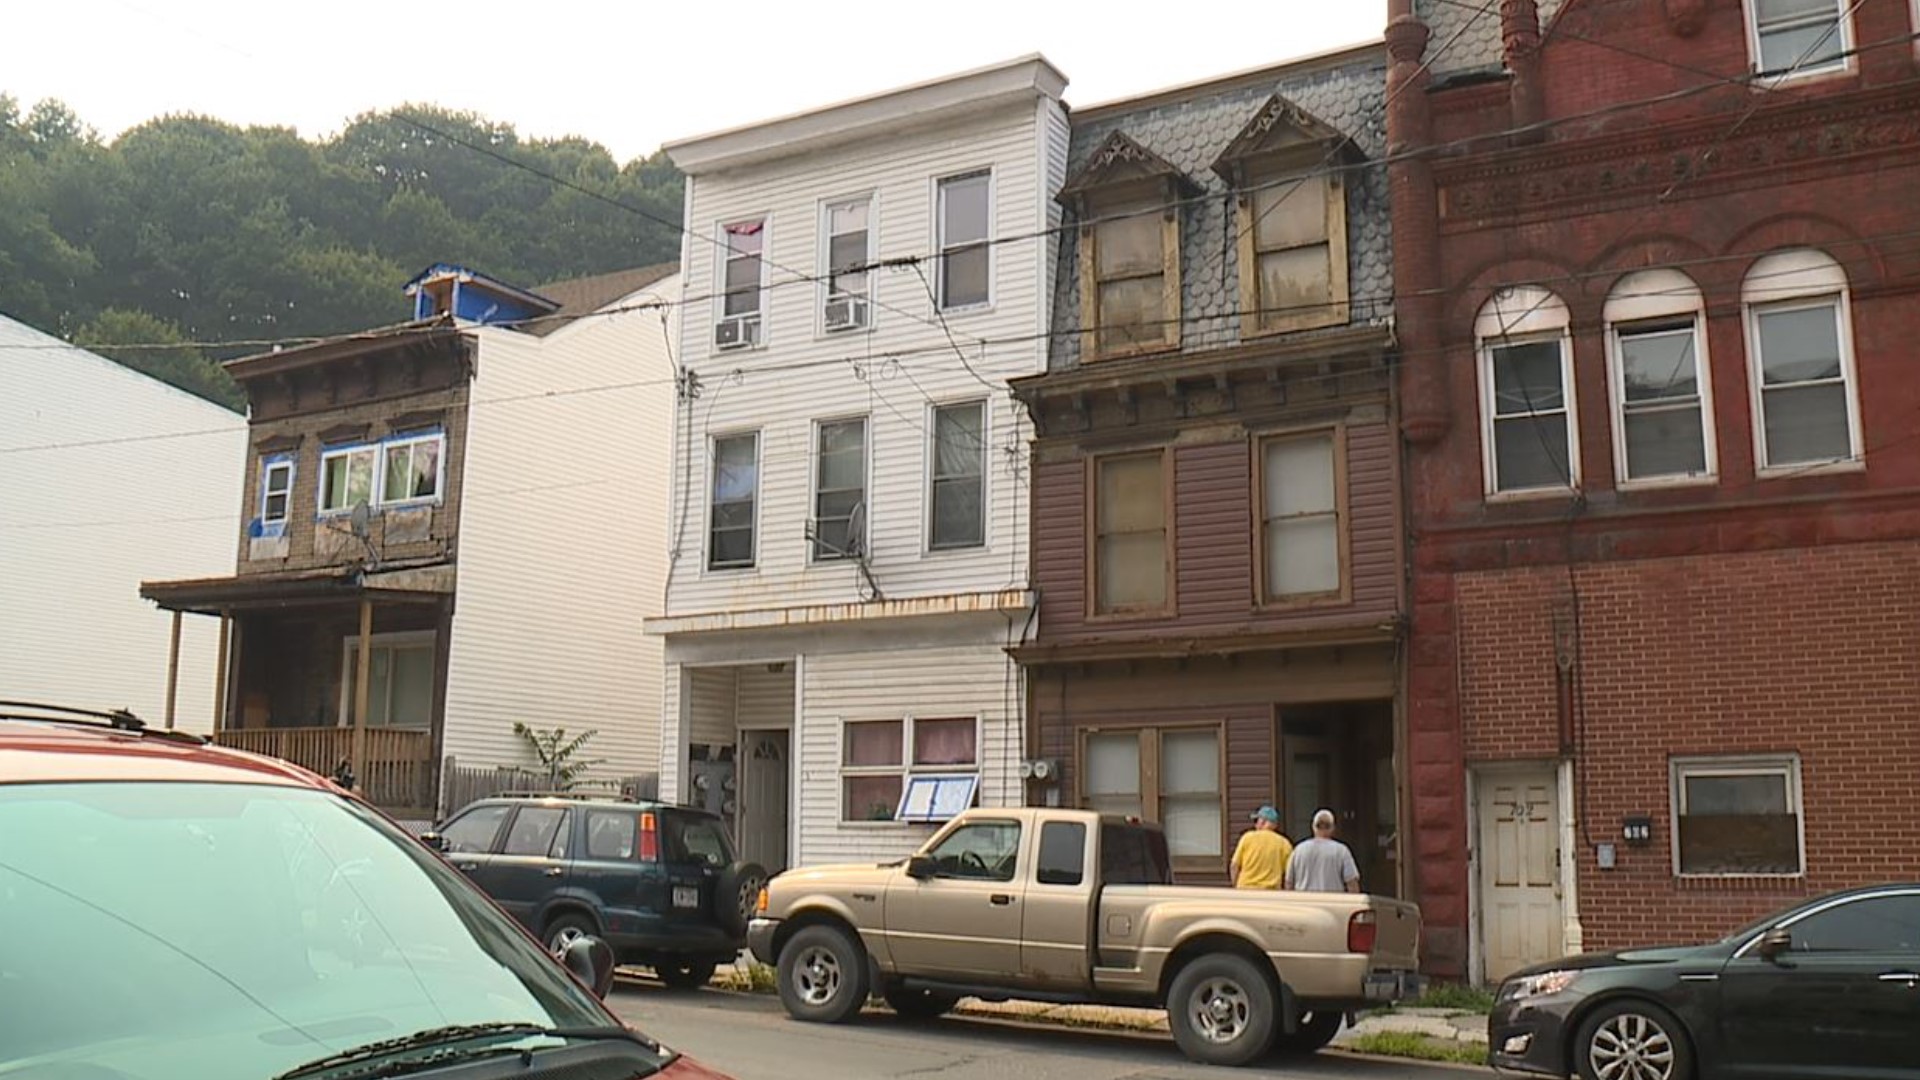 Police are investigating shots fired in Pottsville Tuesday afternoon.